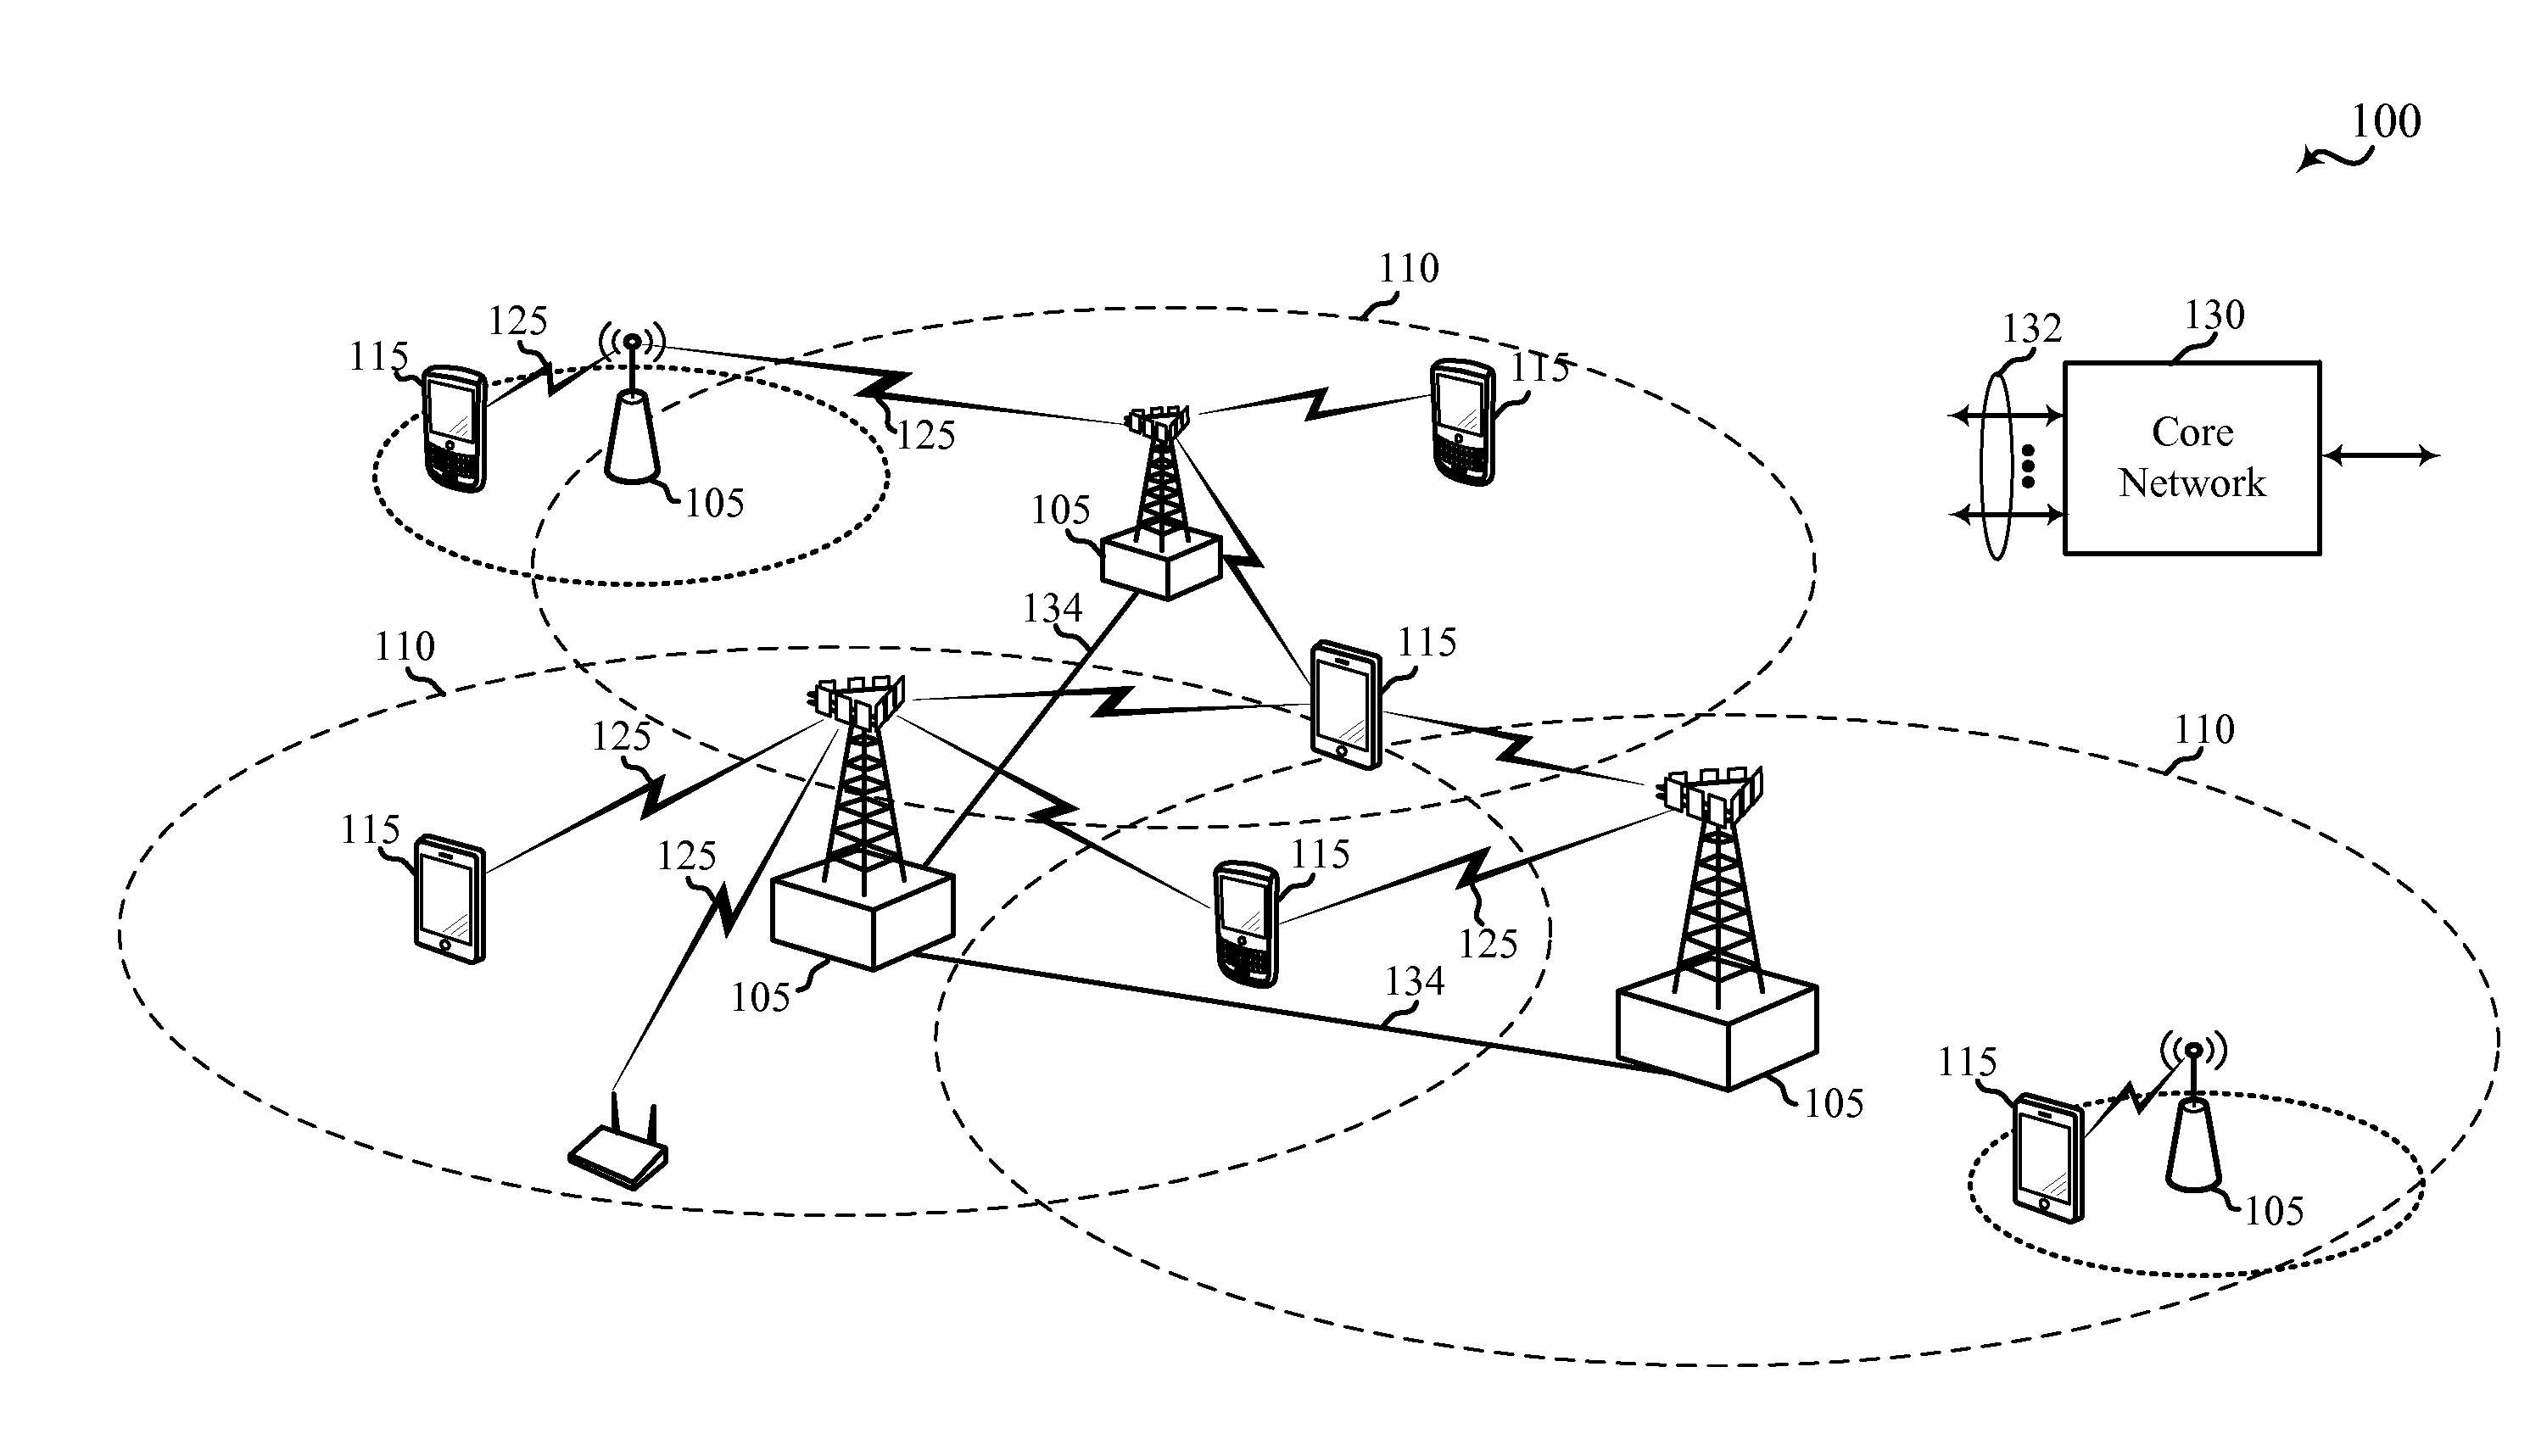 Non-orthogonal multiple access and interference cancellation